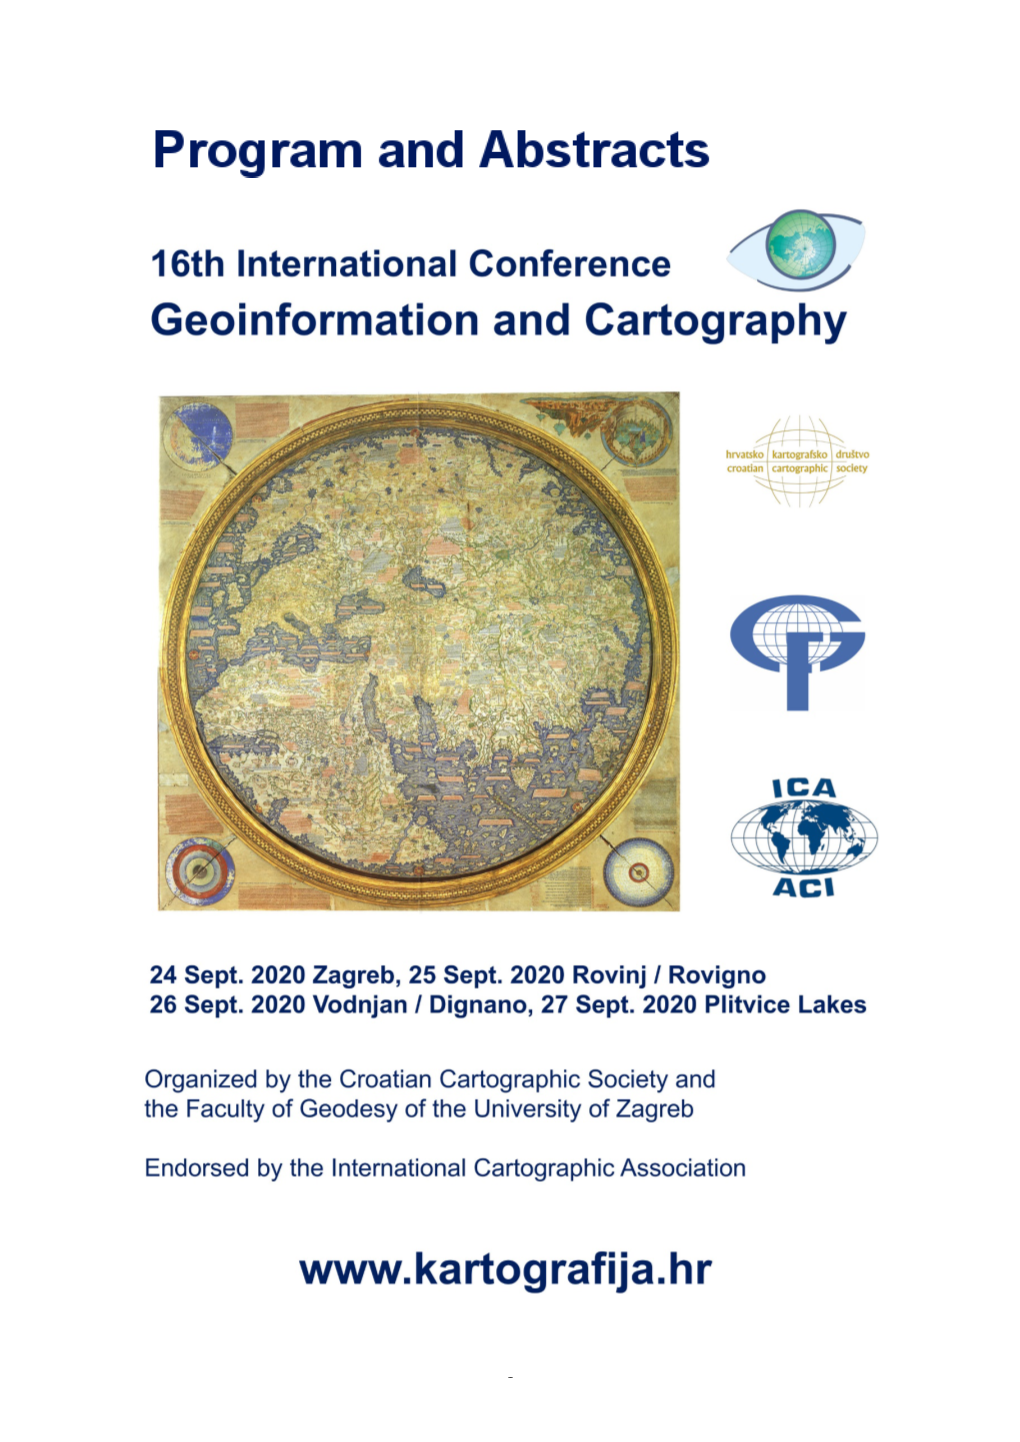 16Th International Conference on Geoinformation and Cartography